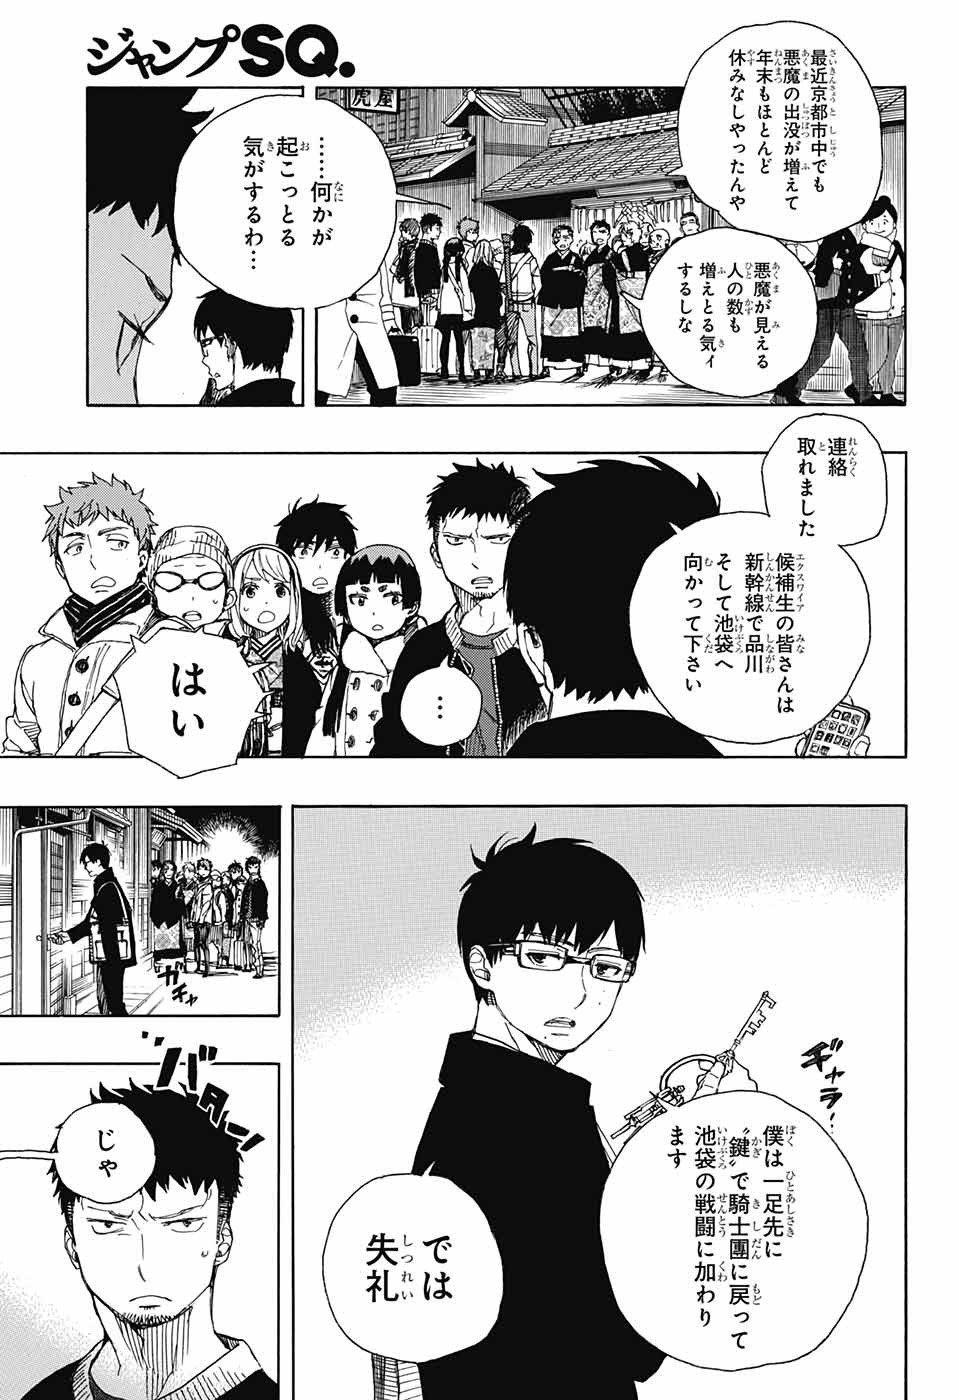 Ao no Exorcist - Chapter 92 - Page 3